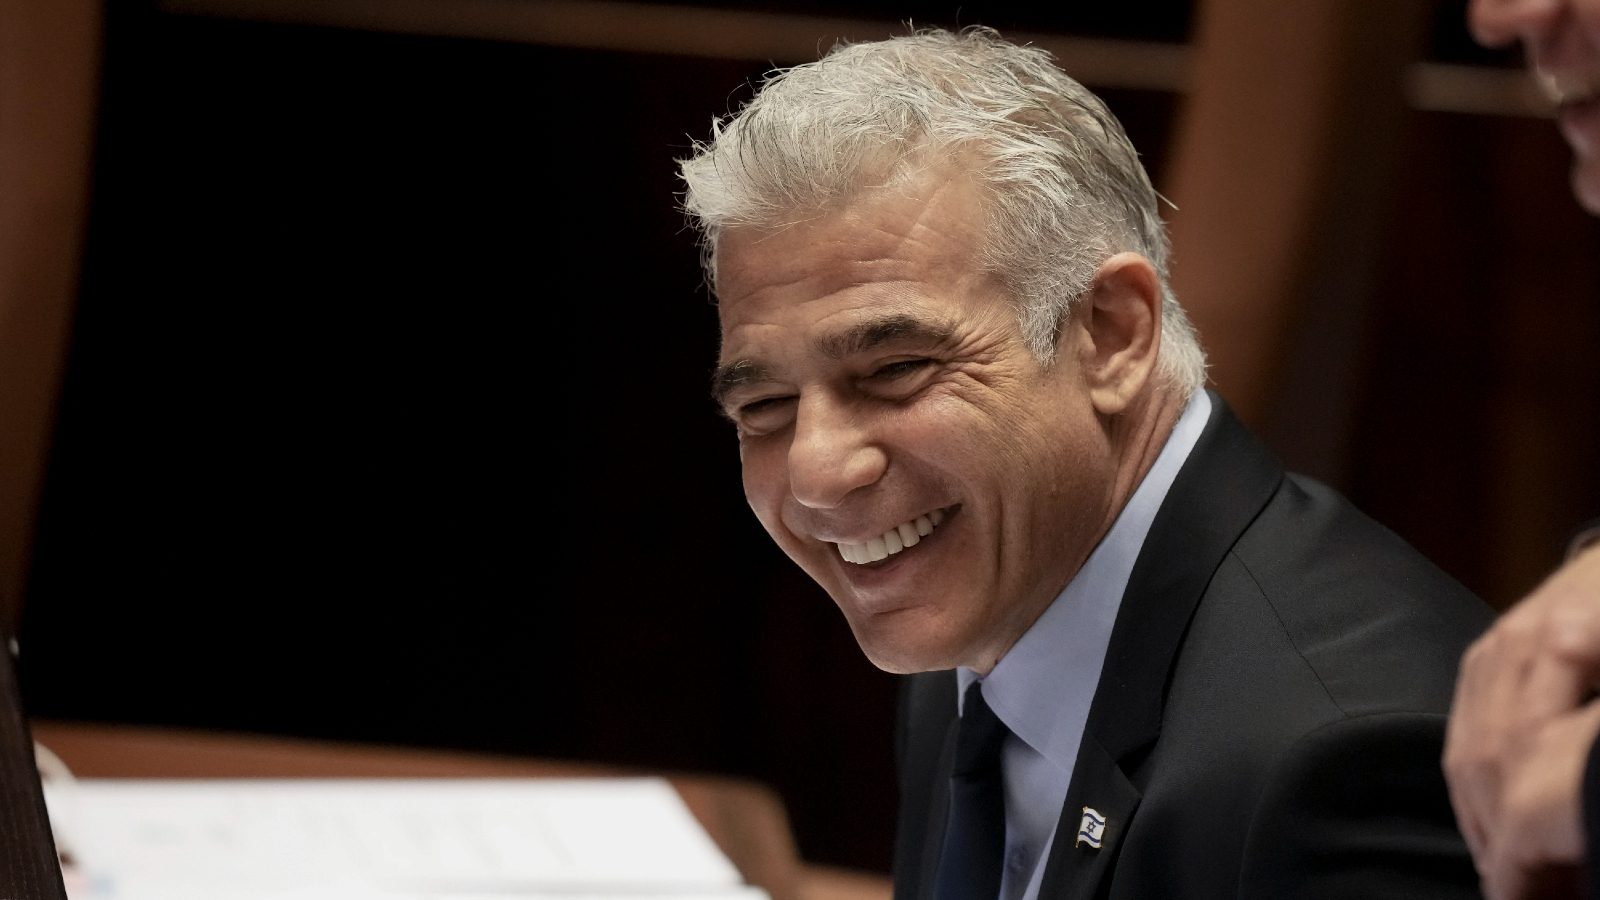 Israel PM Yair Lapid Says World Should Use Force if Iran Builds Nukes, Calls for a ‘Peaceful’ Palestinian State